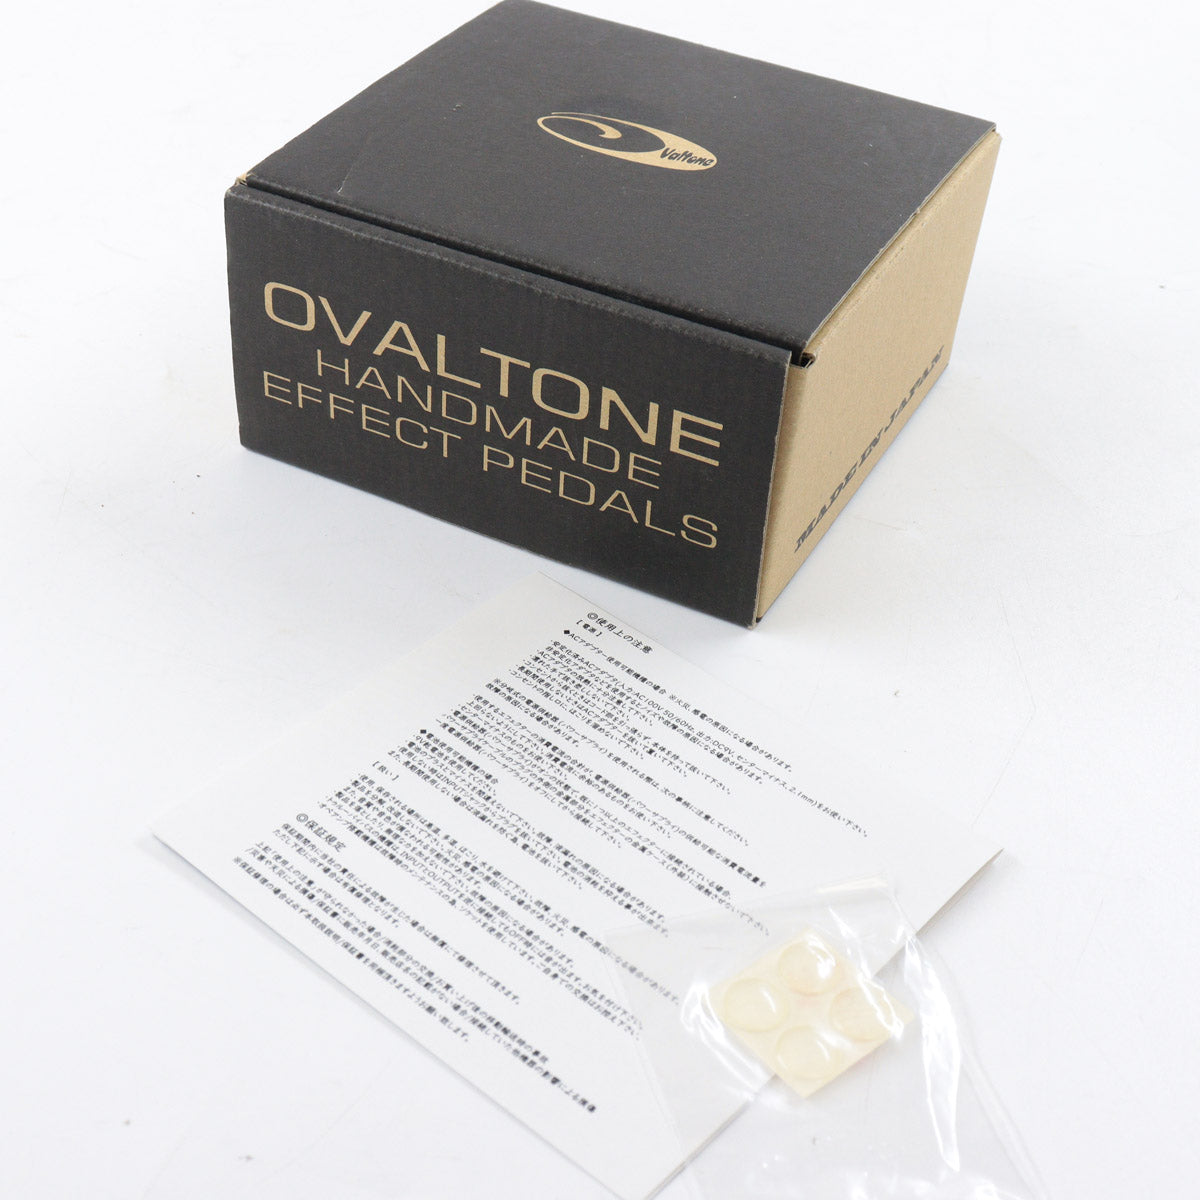 [SN 533] USED OVALTONE / OD-FIVE 2 eXplosion Distortion for Guitar [08]